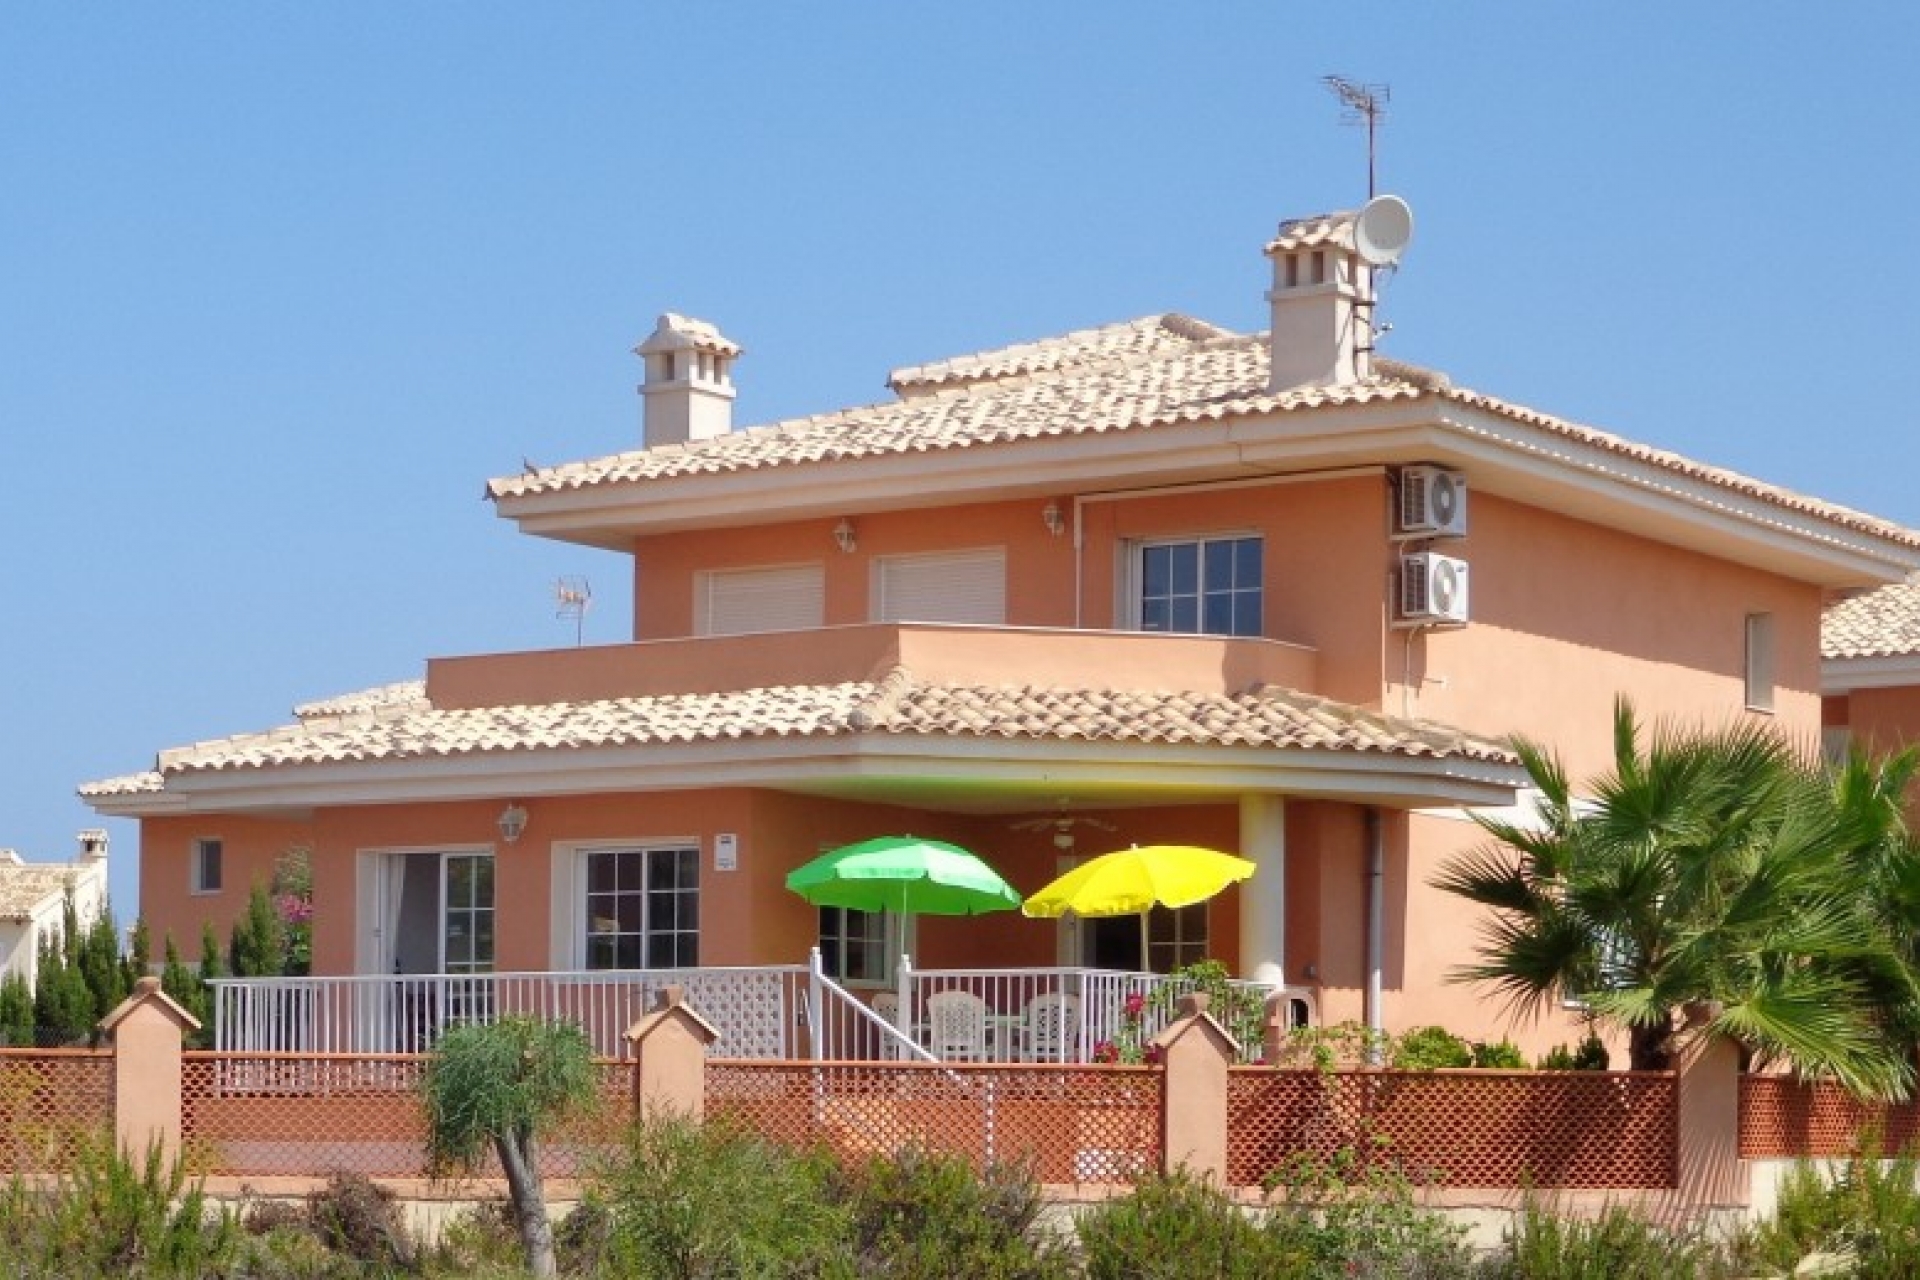 Cheap, bargain property for sale in La Manga close to Cartegena and Murcia on Spains Mar Menor